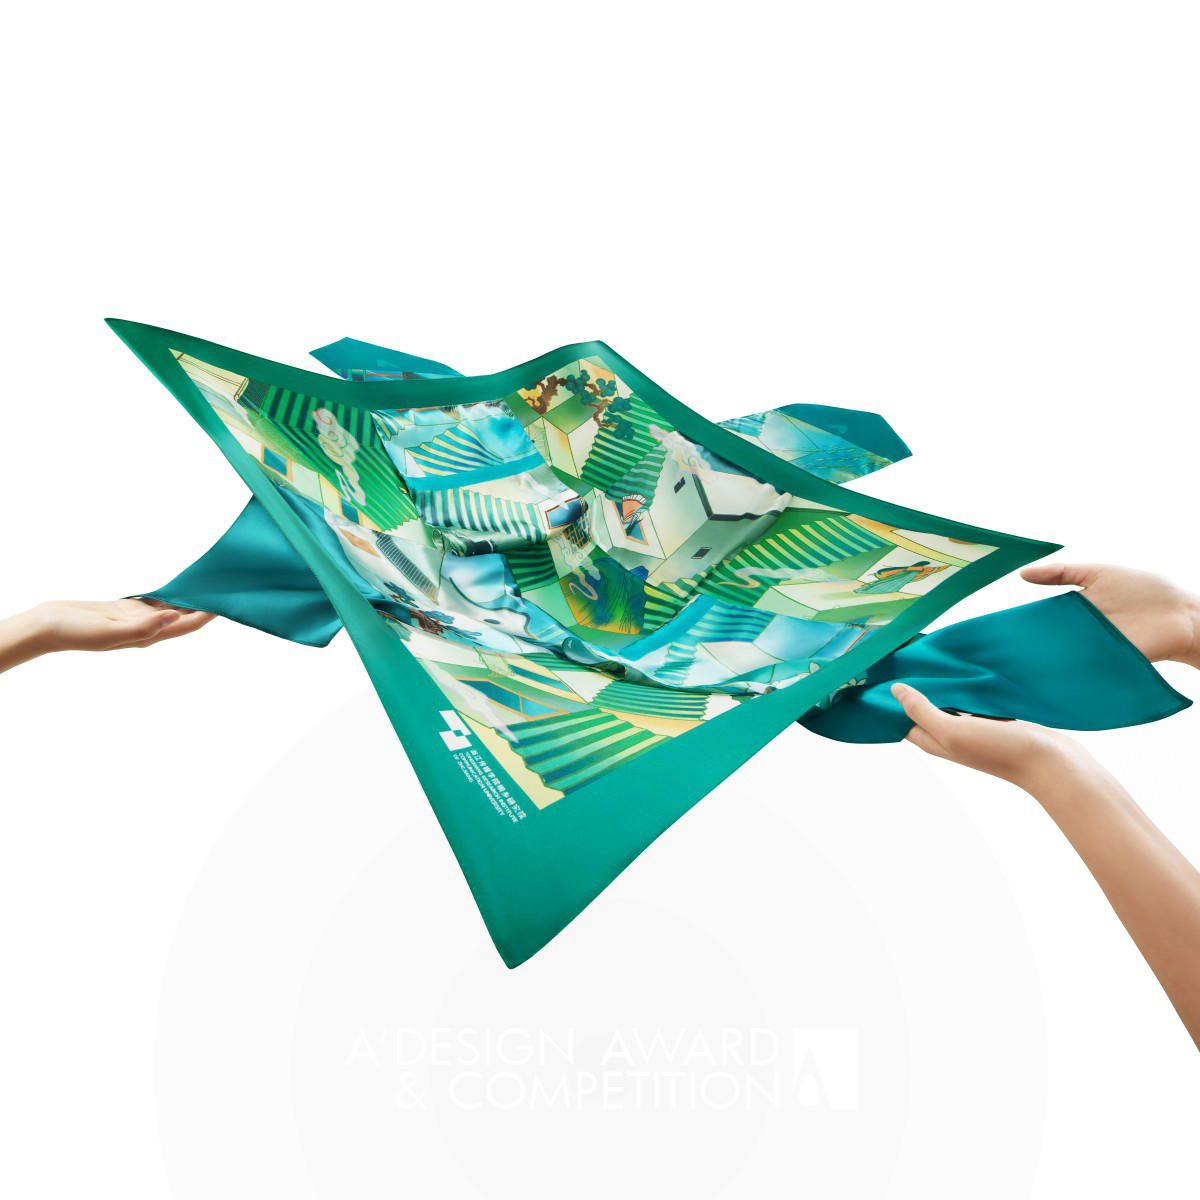 Weaving Interactable Silk Scarf by Ye Feng